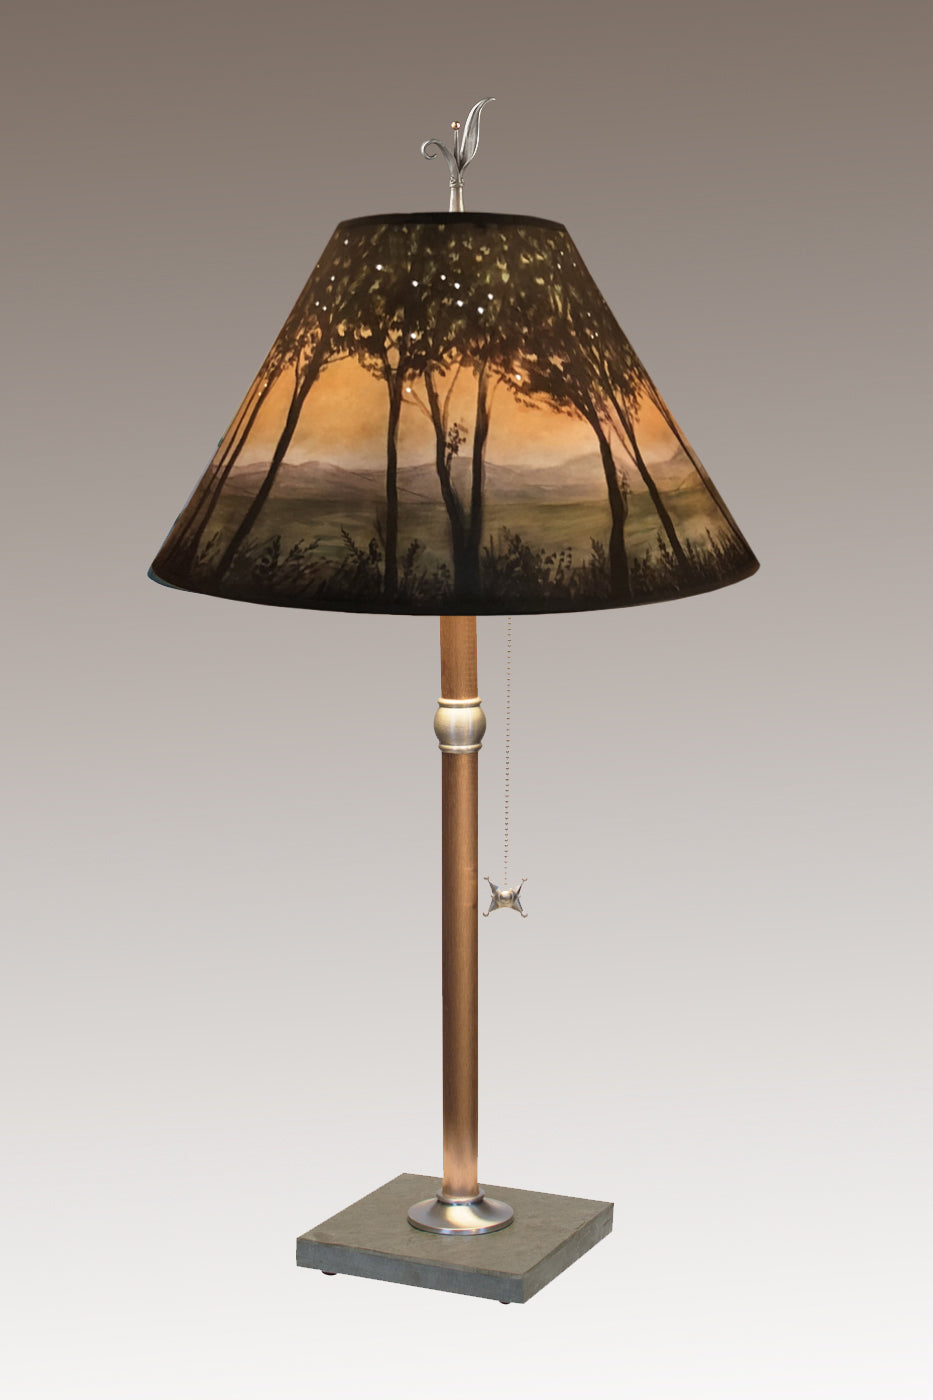 Copper Table Lamp with Medium Conical Shade in Dawn